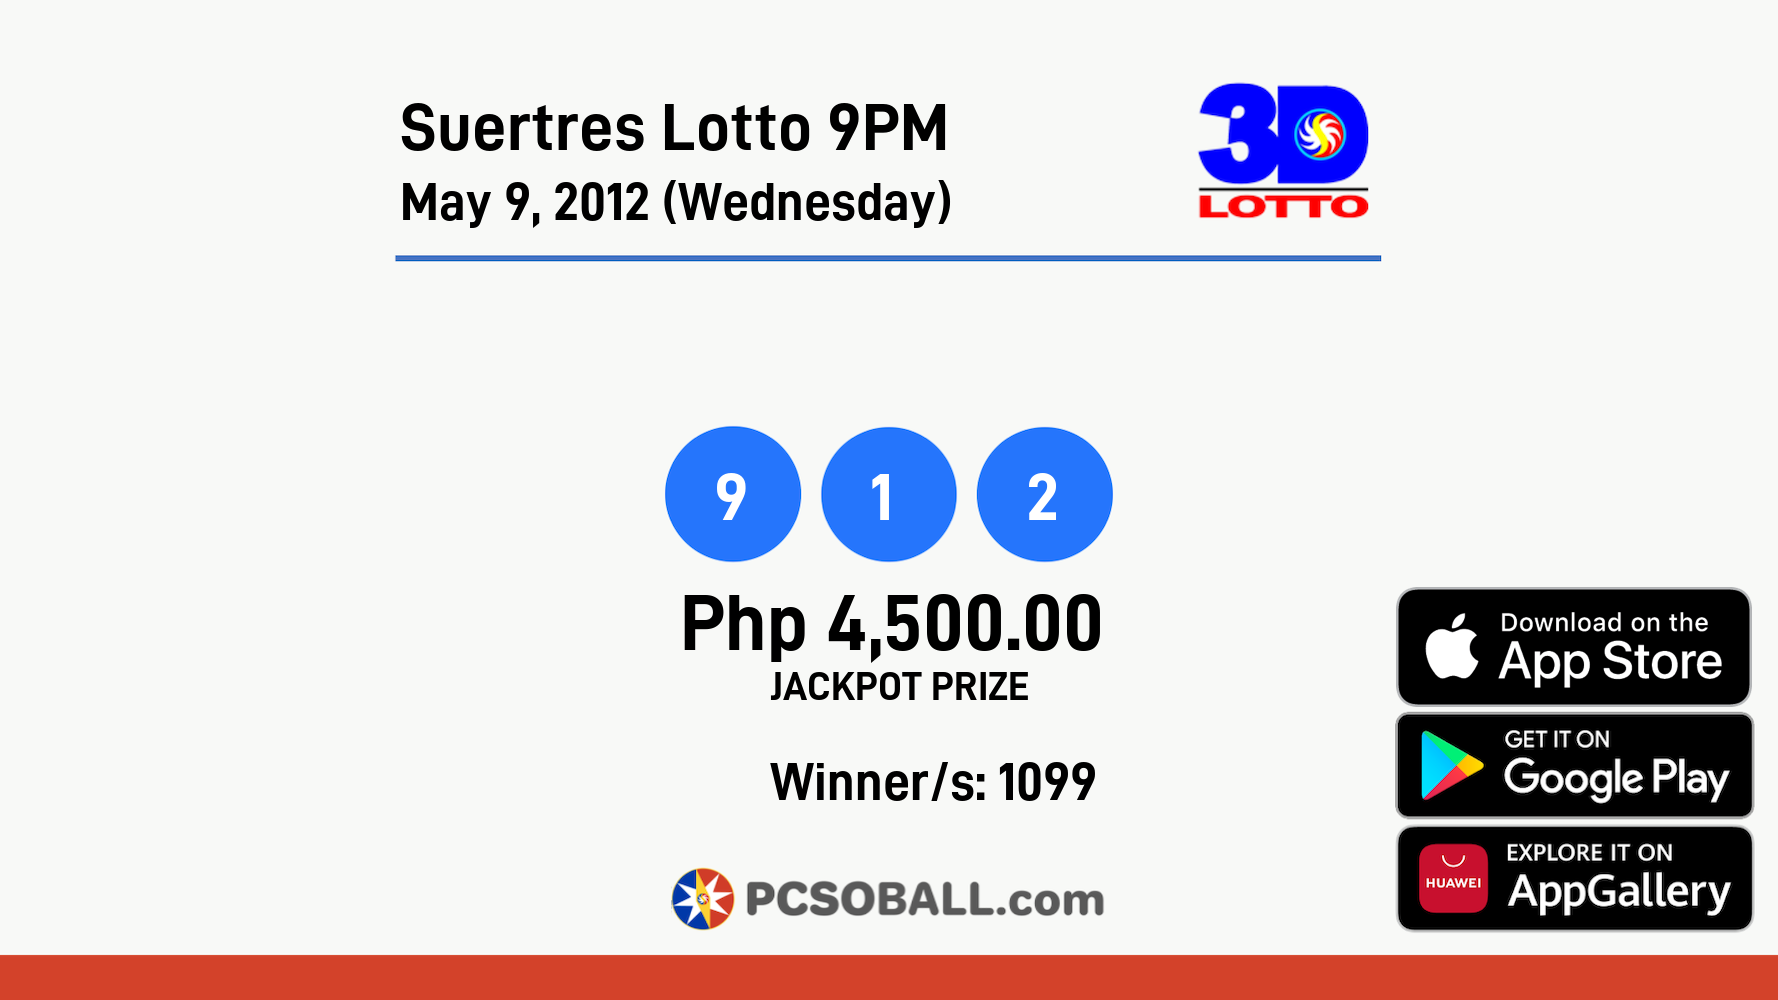 Suertres Lotto 9PM May 9, 2012 (Wednesday) Result